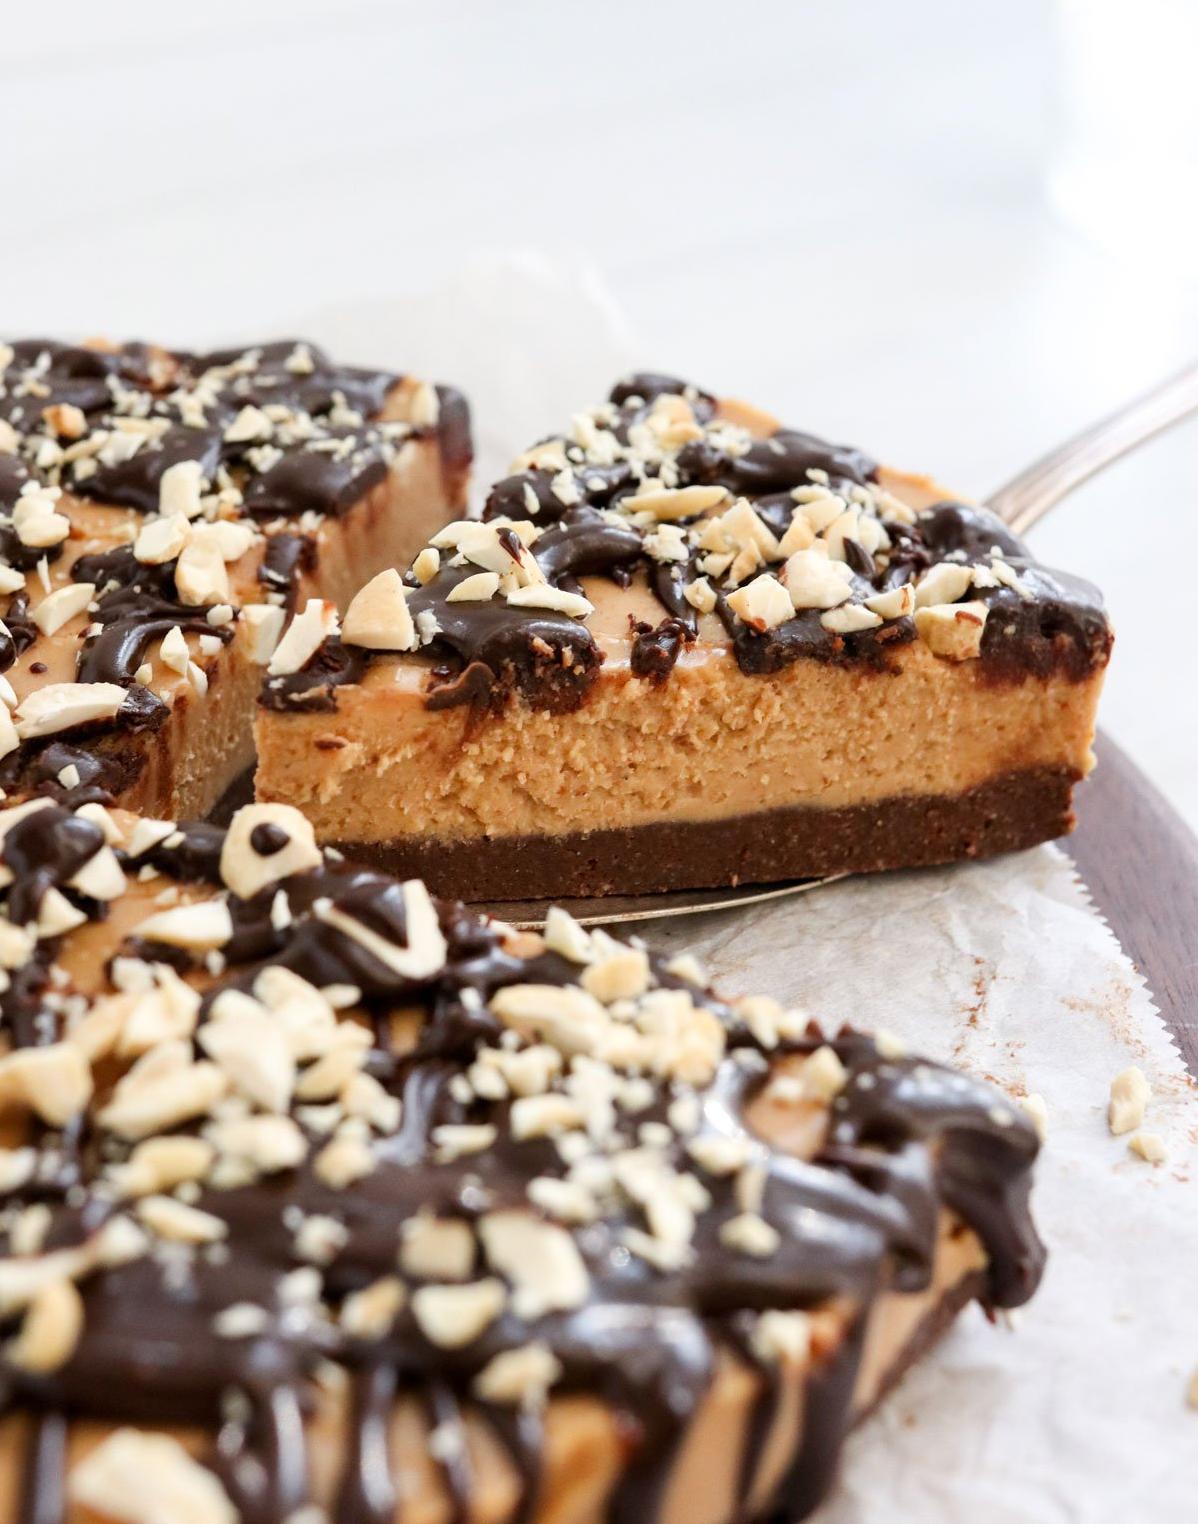  This pie is a heaven for peanut butter lovers.